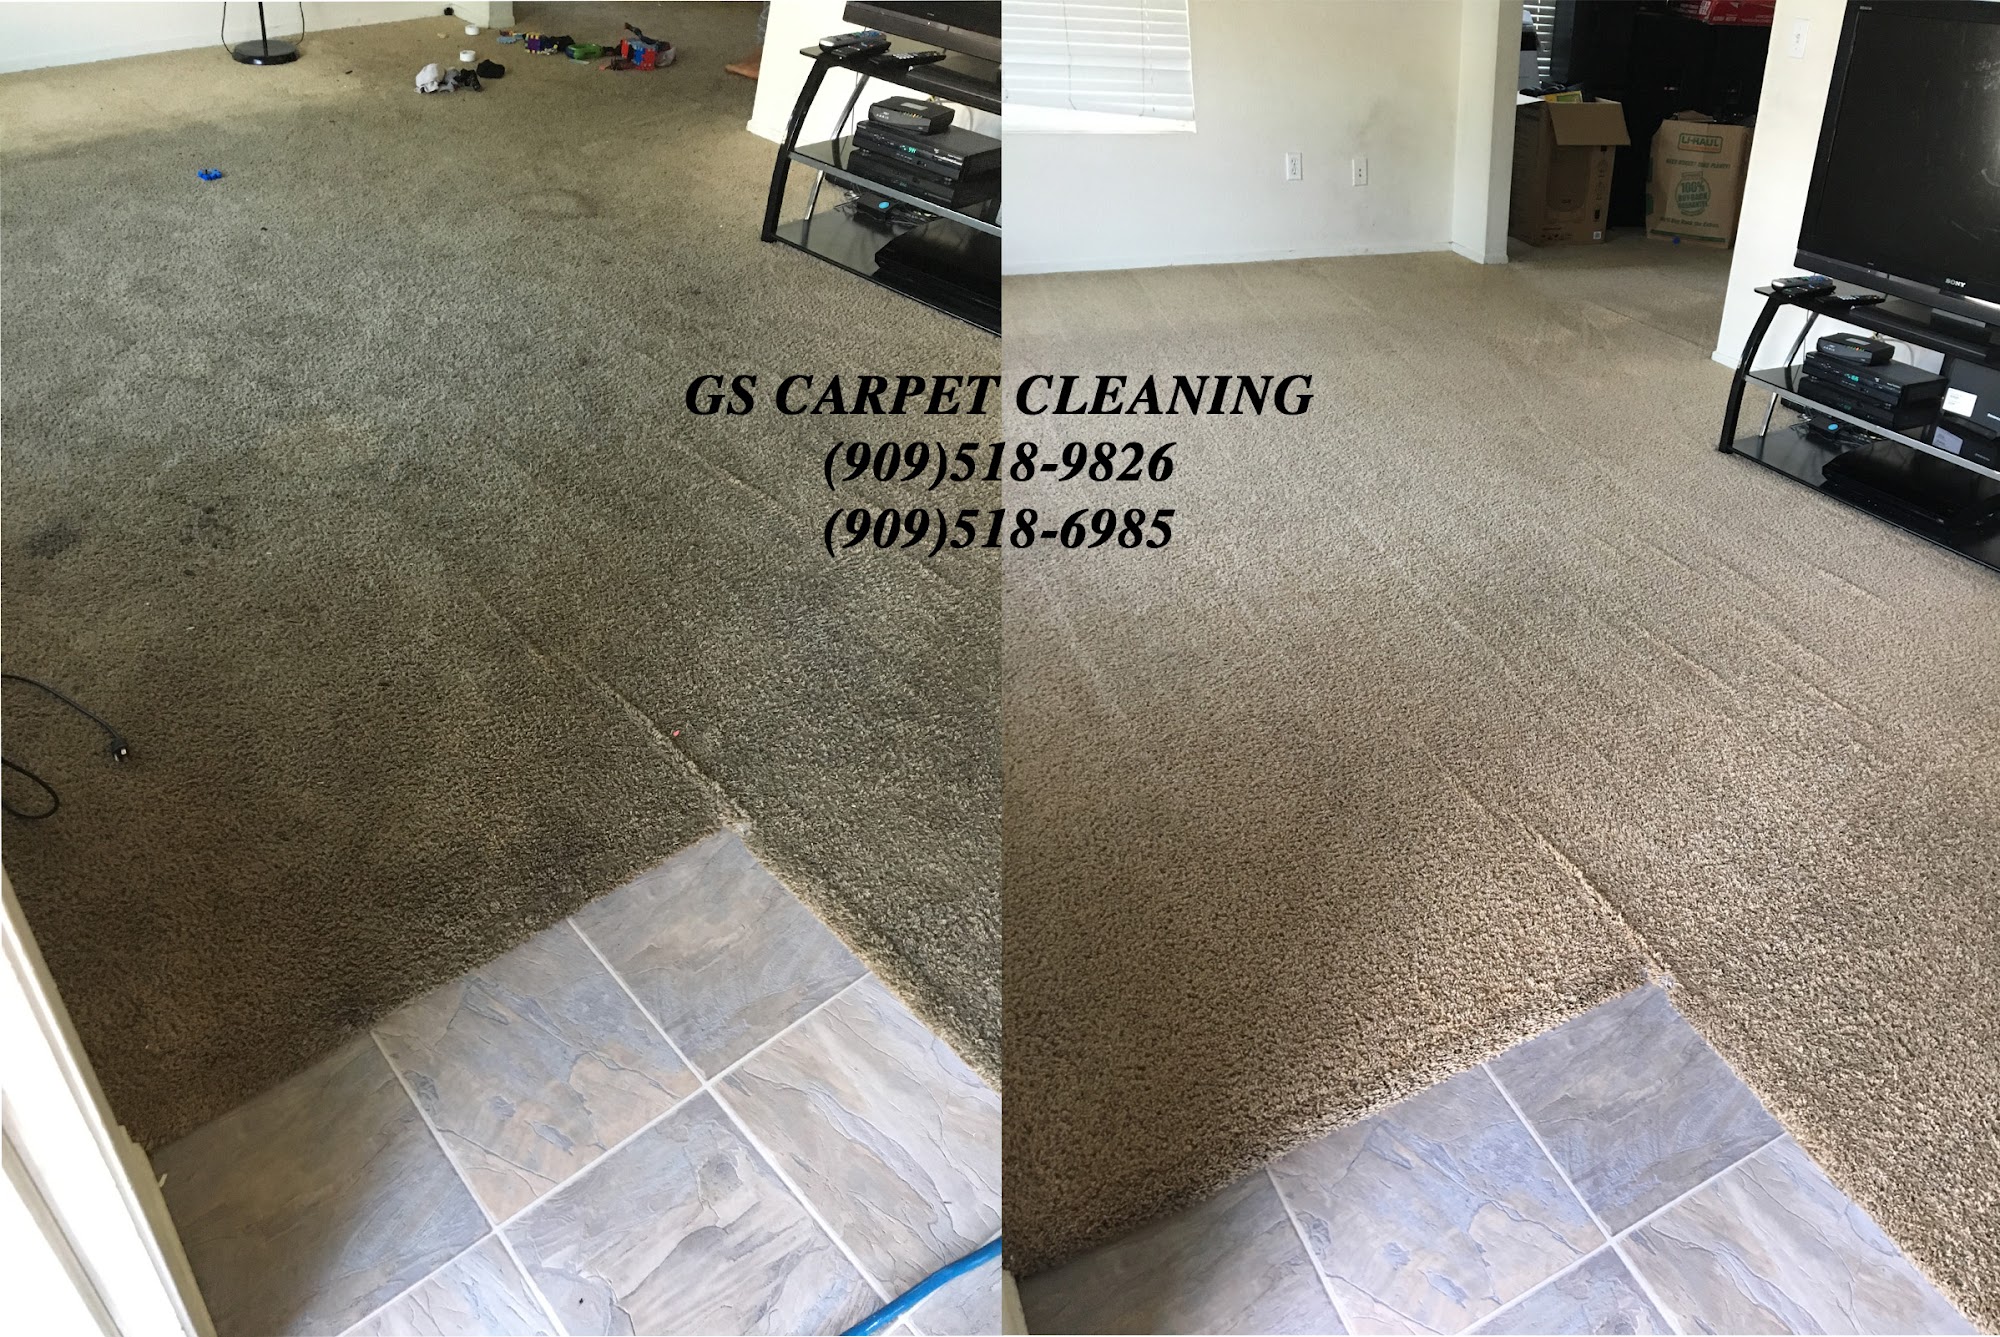 GS CARPET CLEANING & JANITORIAL SERVICE